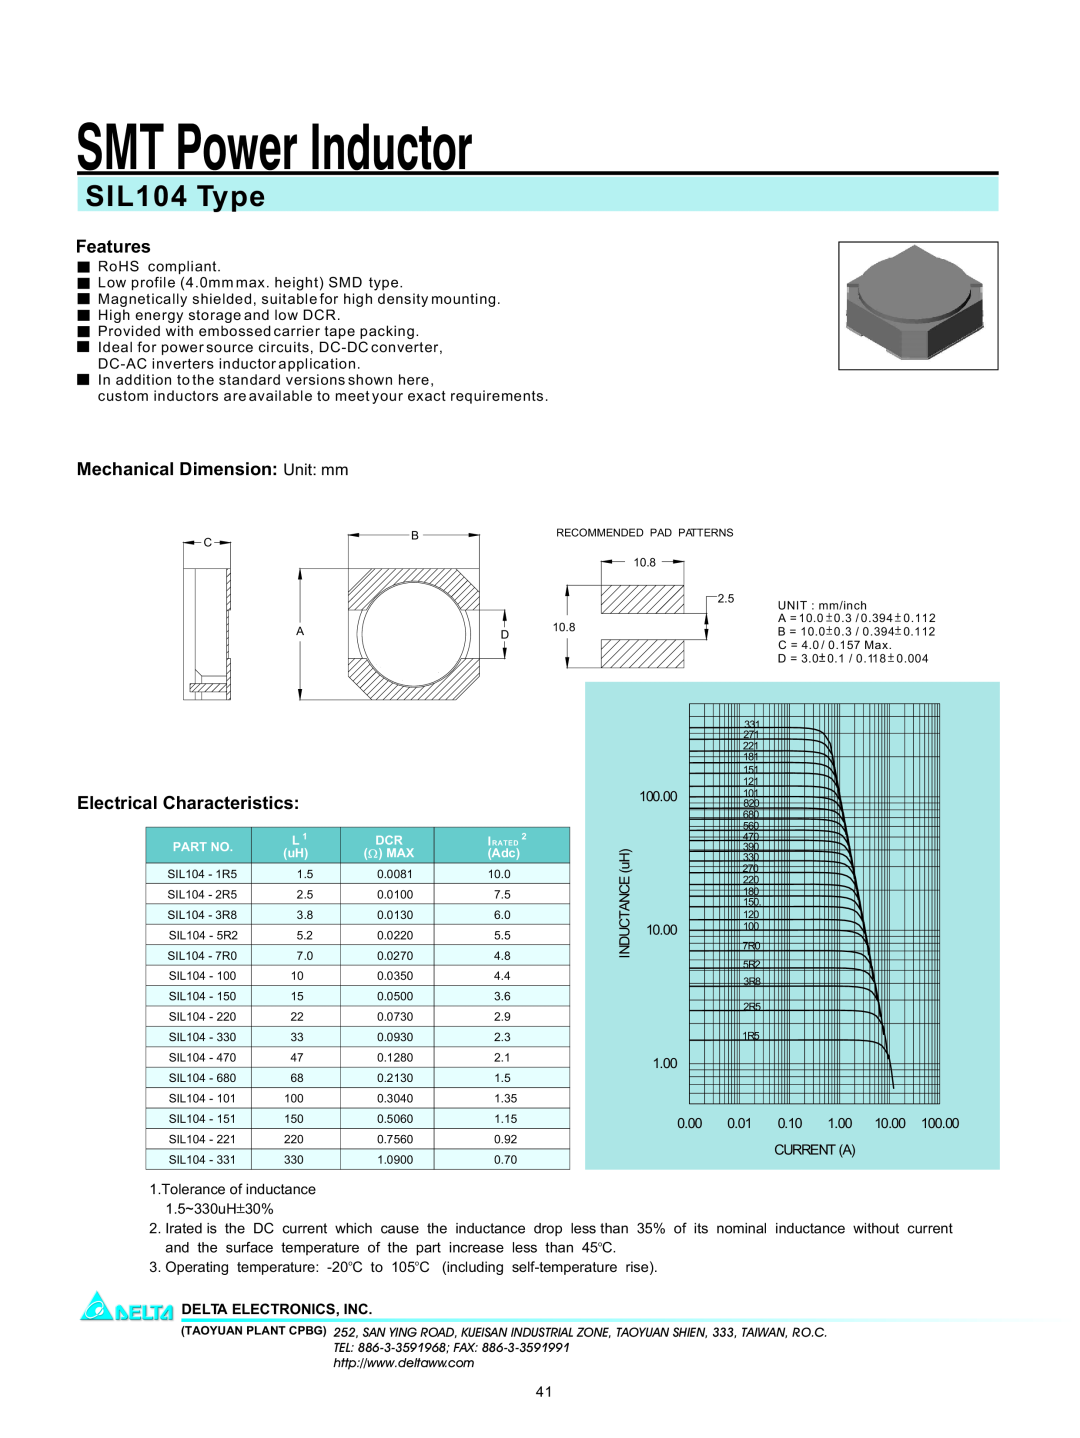 Delta Electronics manual SMT Power Inductor, SIL104 Type, Features, Mechanical Dimension Unit mm 